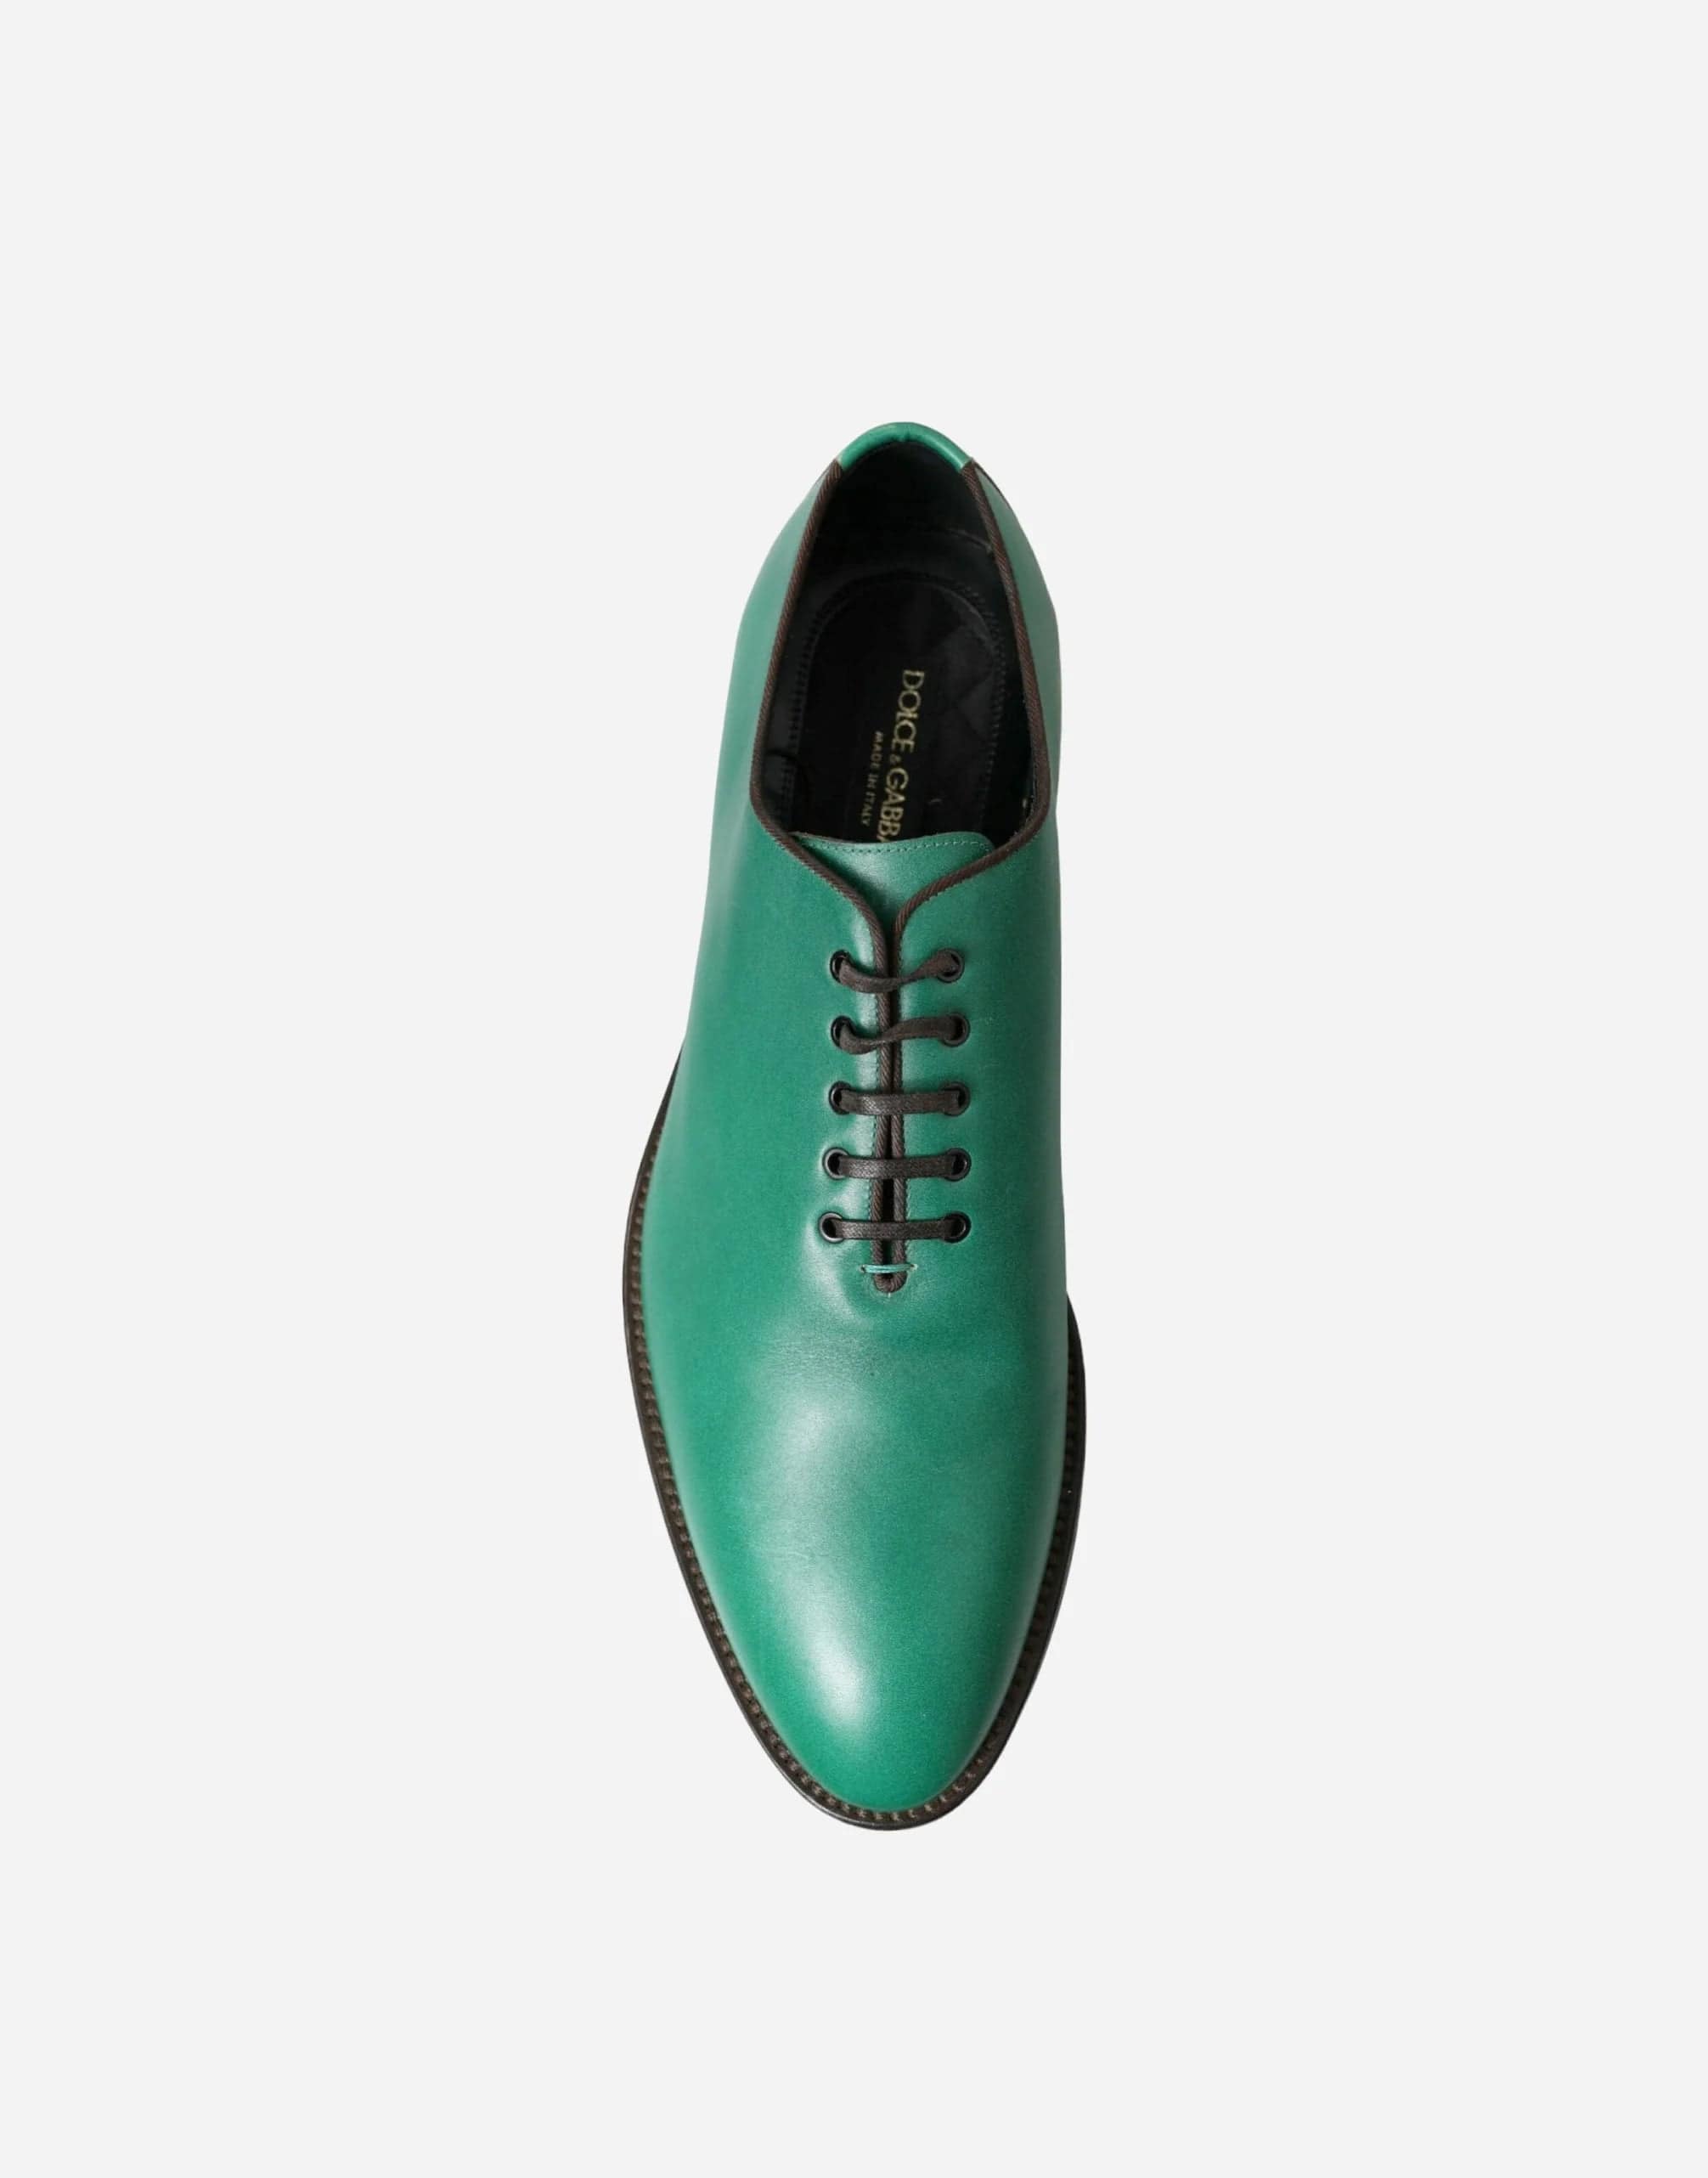 Oxford Lace Up Dress Shoes